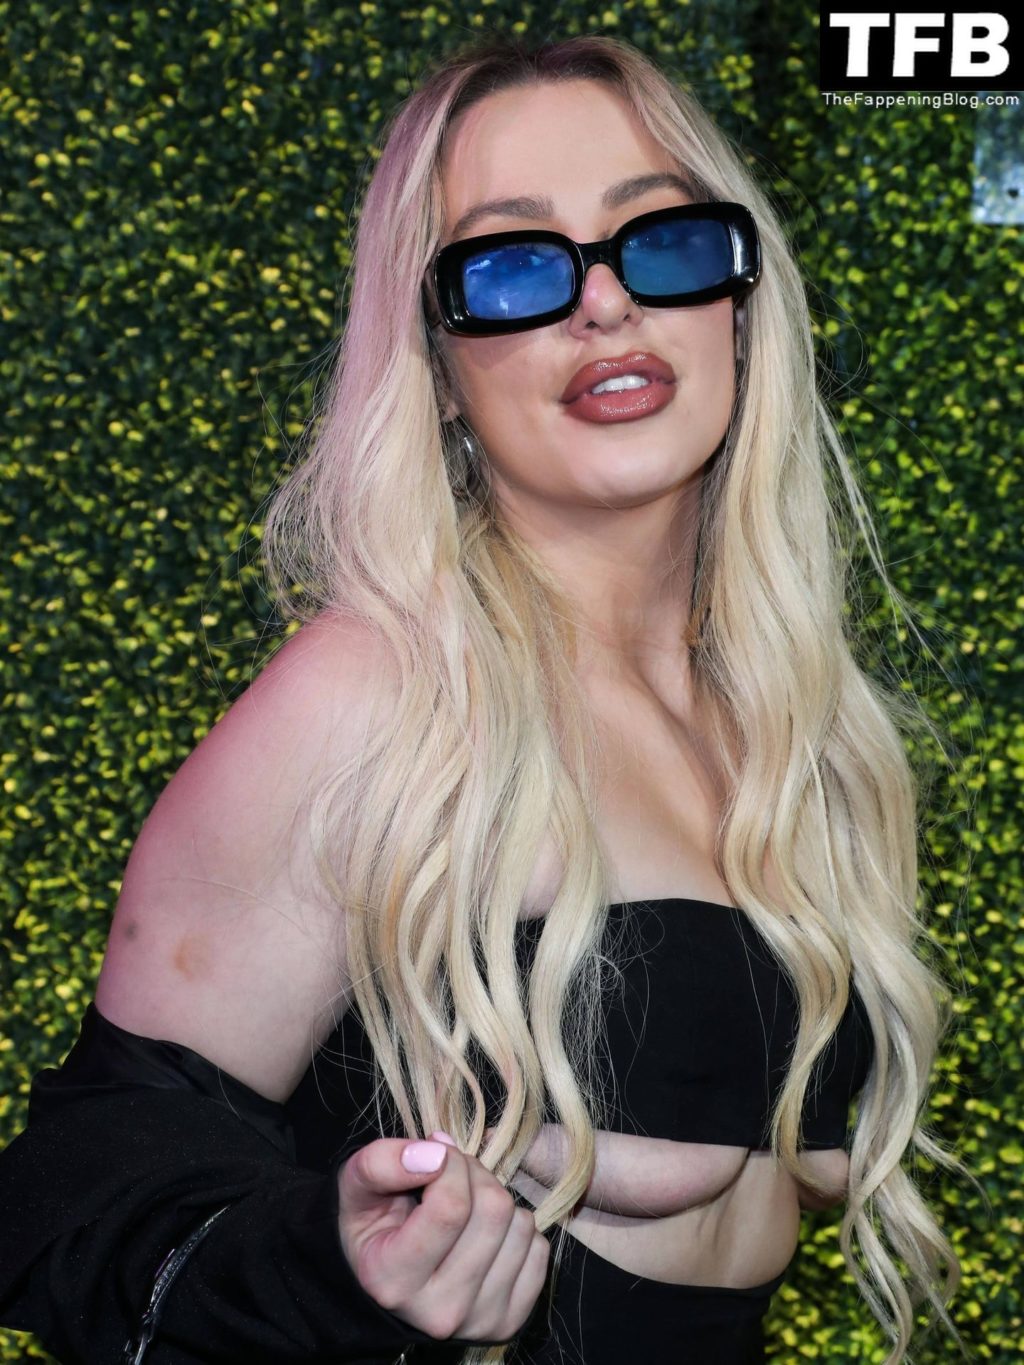 Tana Mongeau Displays Her Underboob at the Sunny Vodka Launch Party (43 Photos)